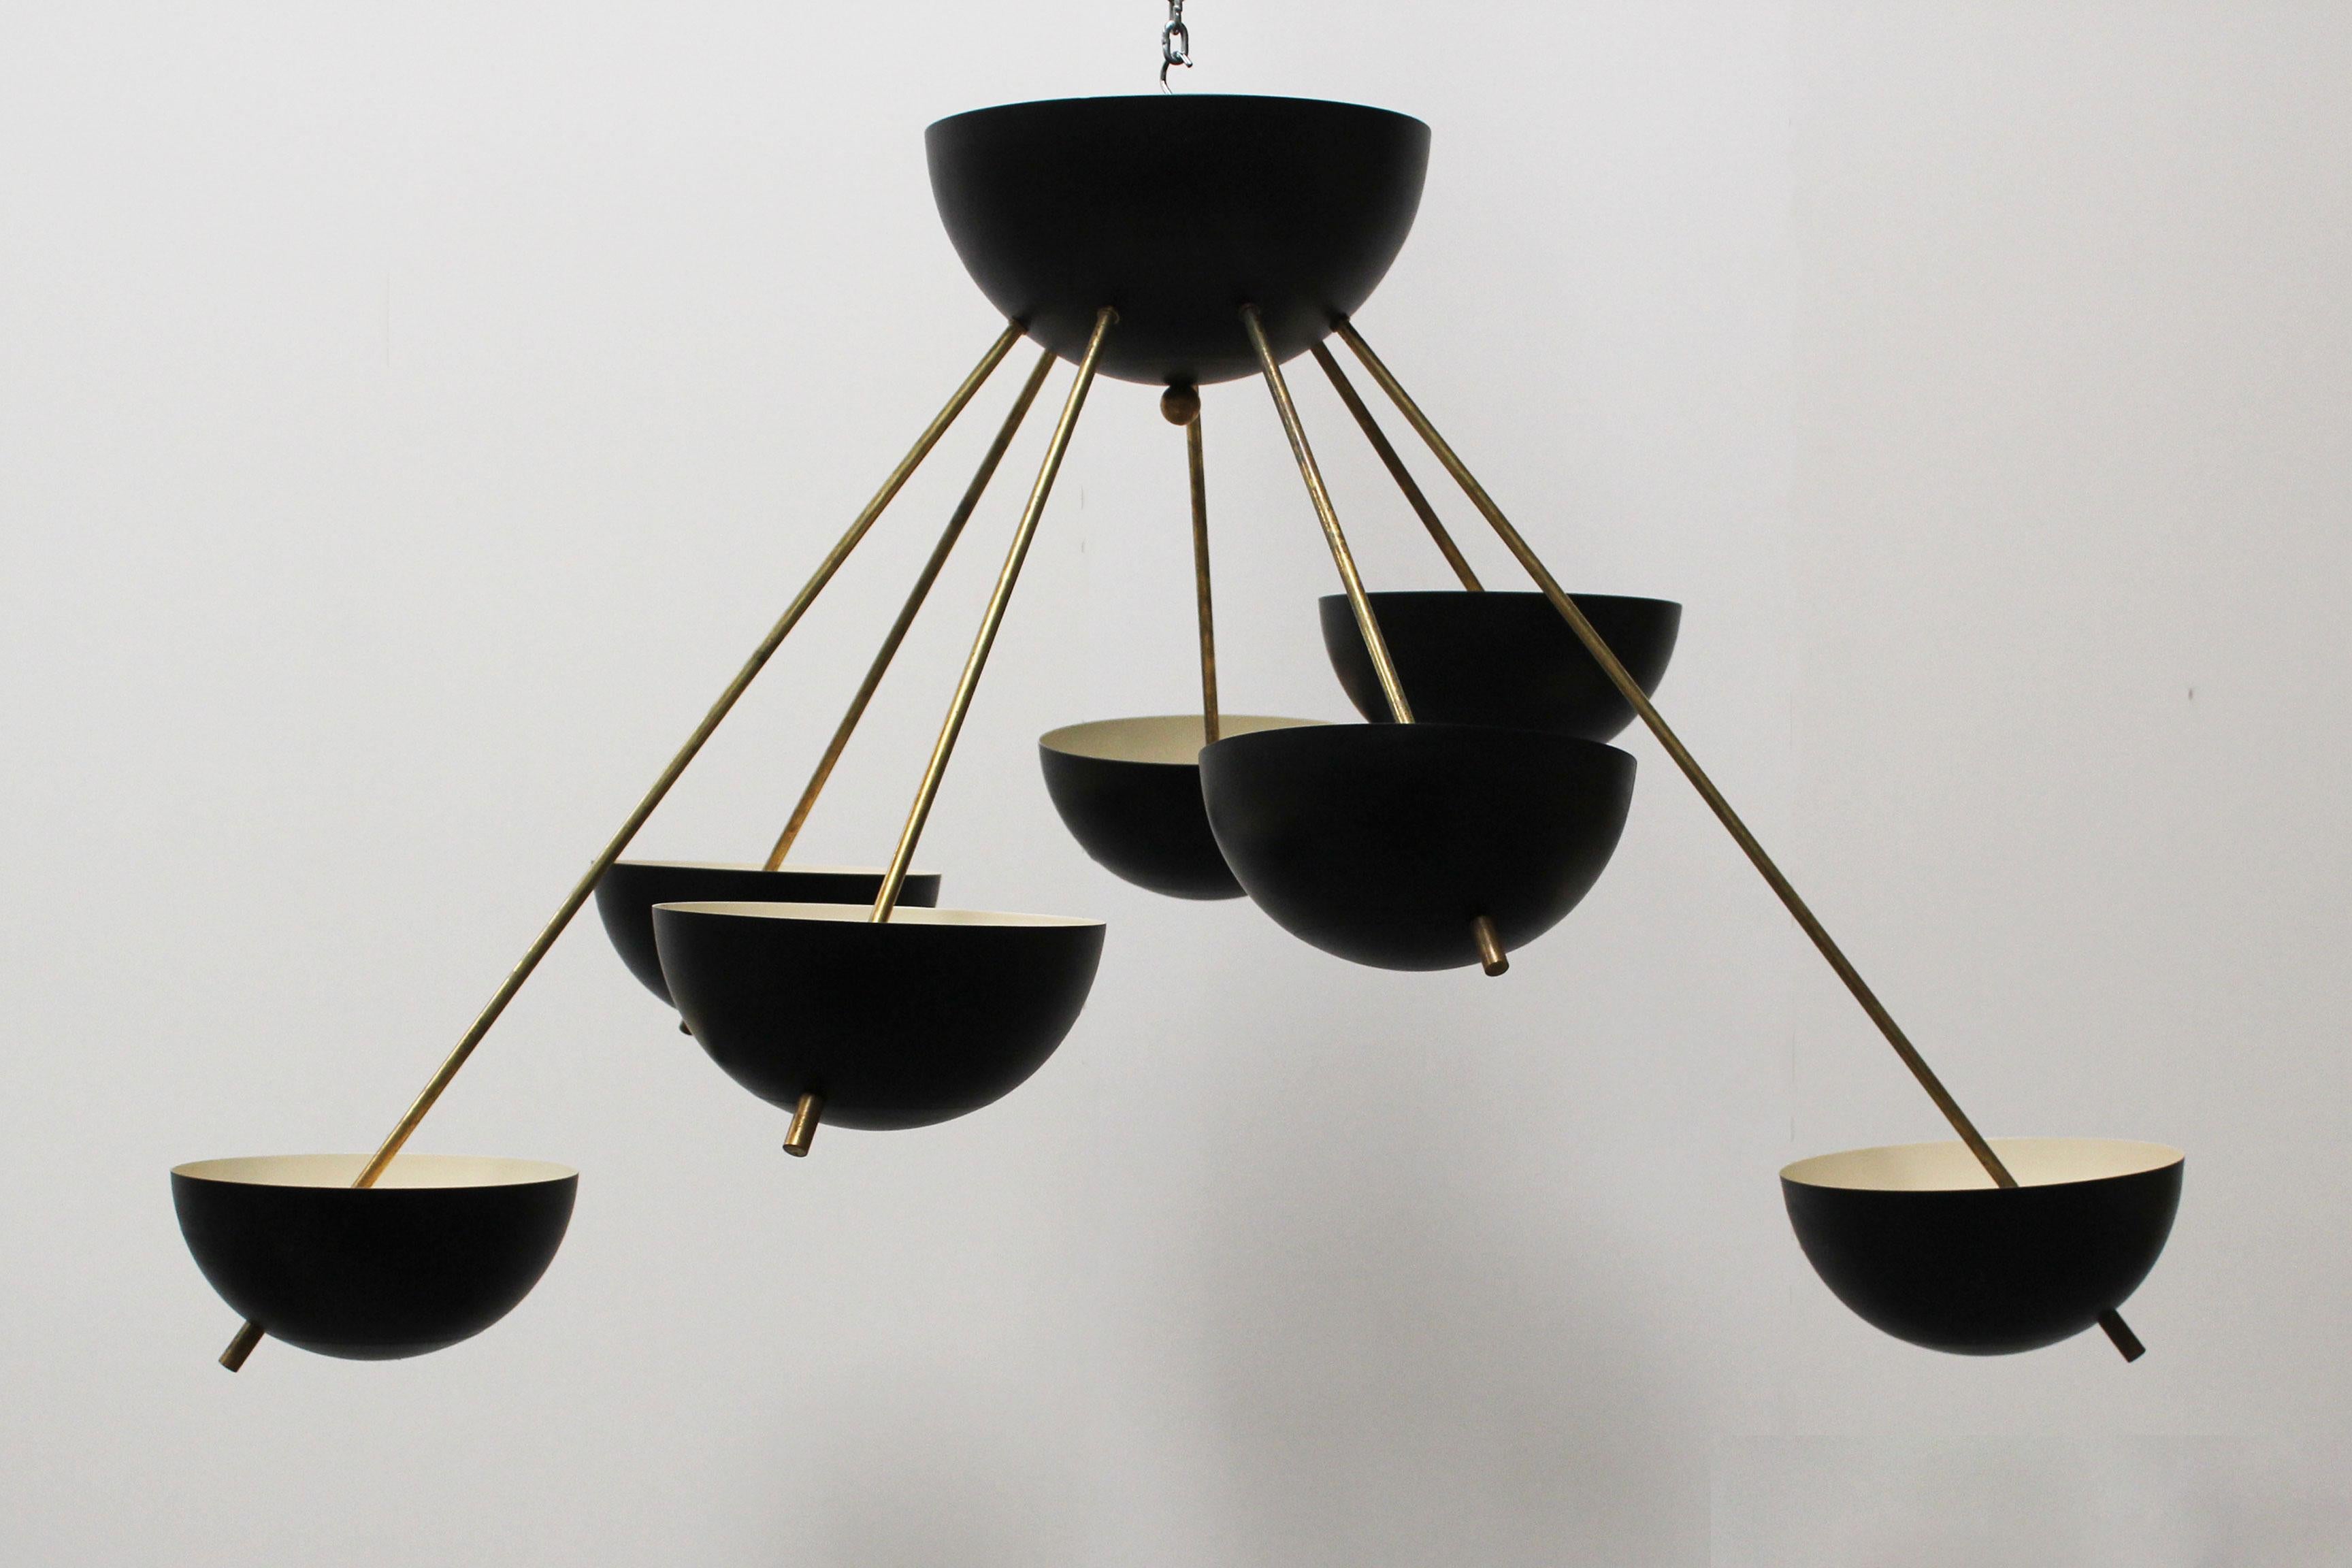 Magnificent midcentury design Sputnik chandelier attributed to Stilnovo, circa 1958
It has a wonderful minimalistic Stilnovo attributed design with lines inspired by the Space Age.
The chandelier has seven sockets and is fully rewired. Brass shows